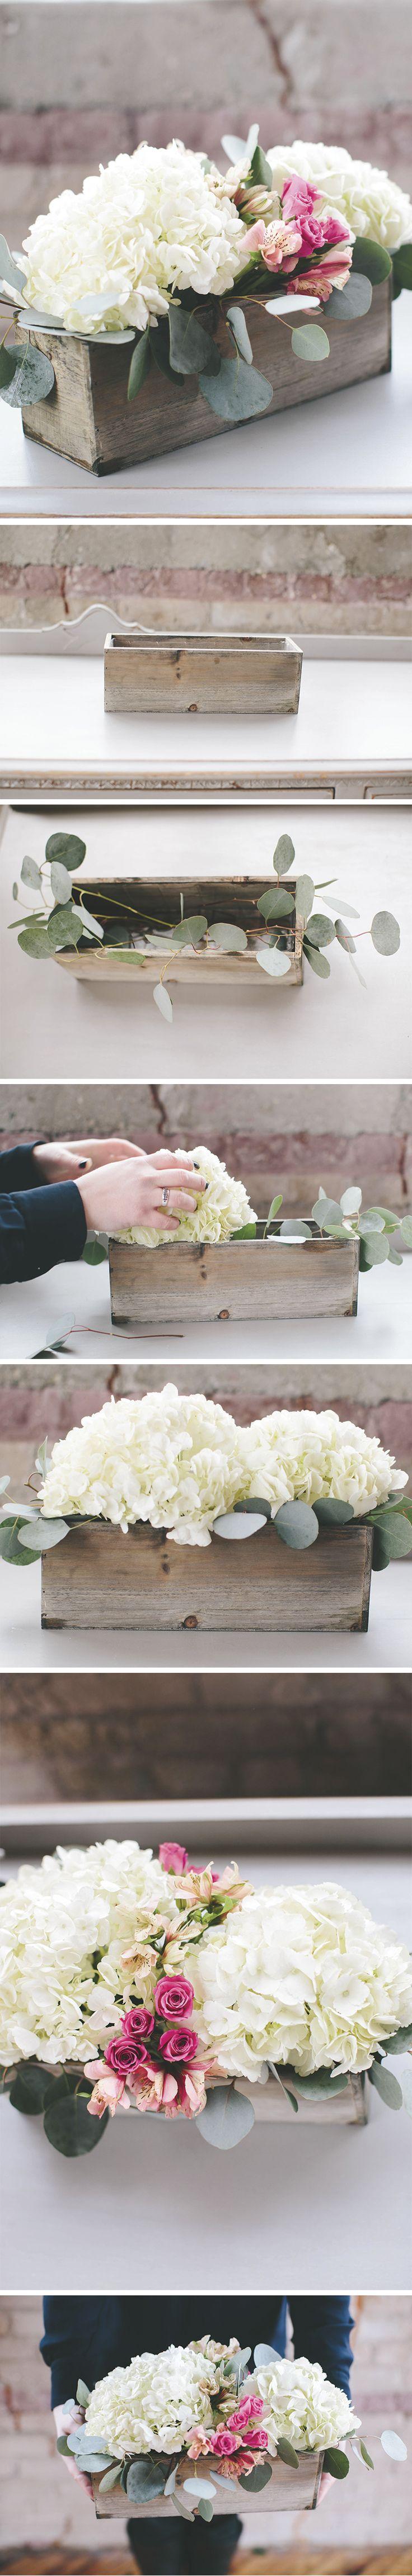 Mariage - How To: A Modern DIY Hydrangea Centerpiece That Anyone Can Make